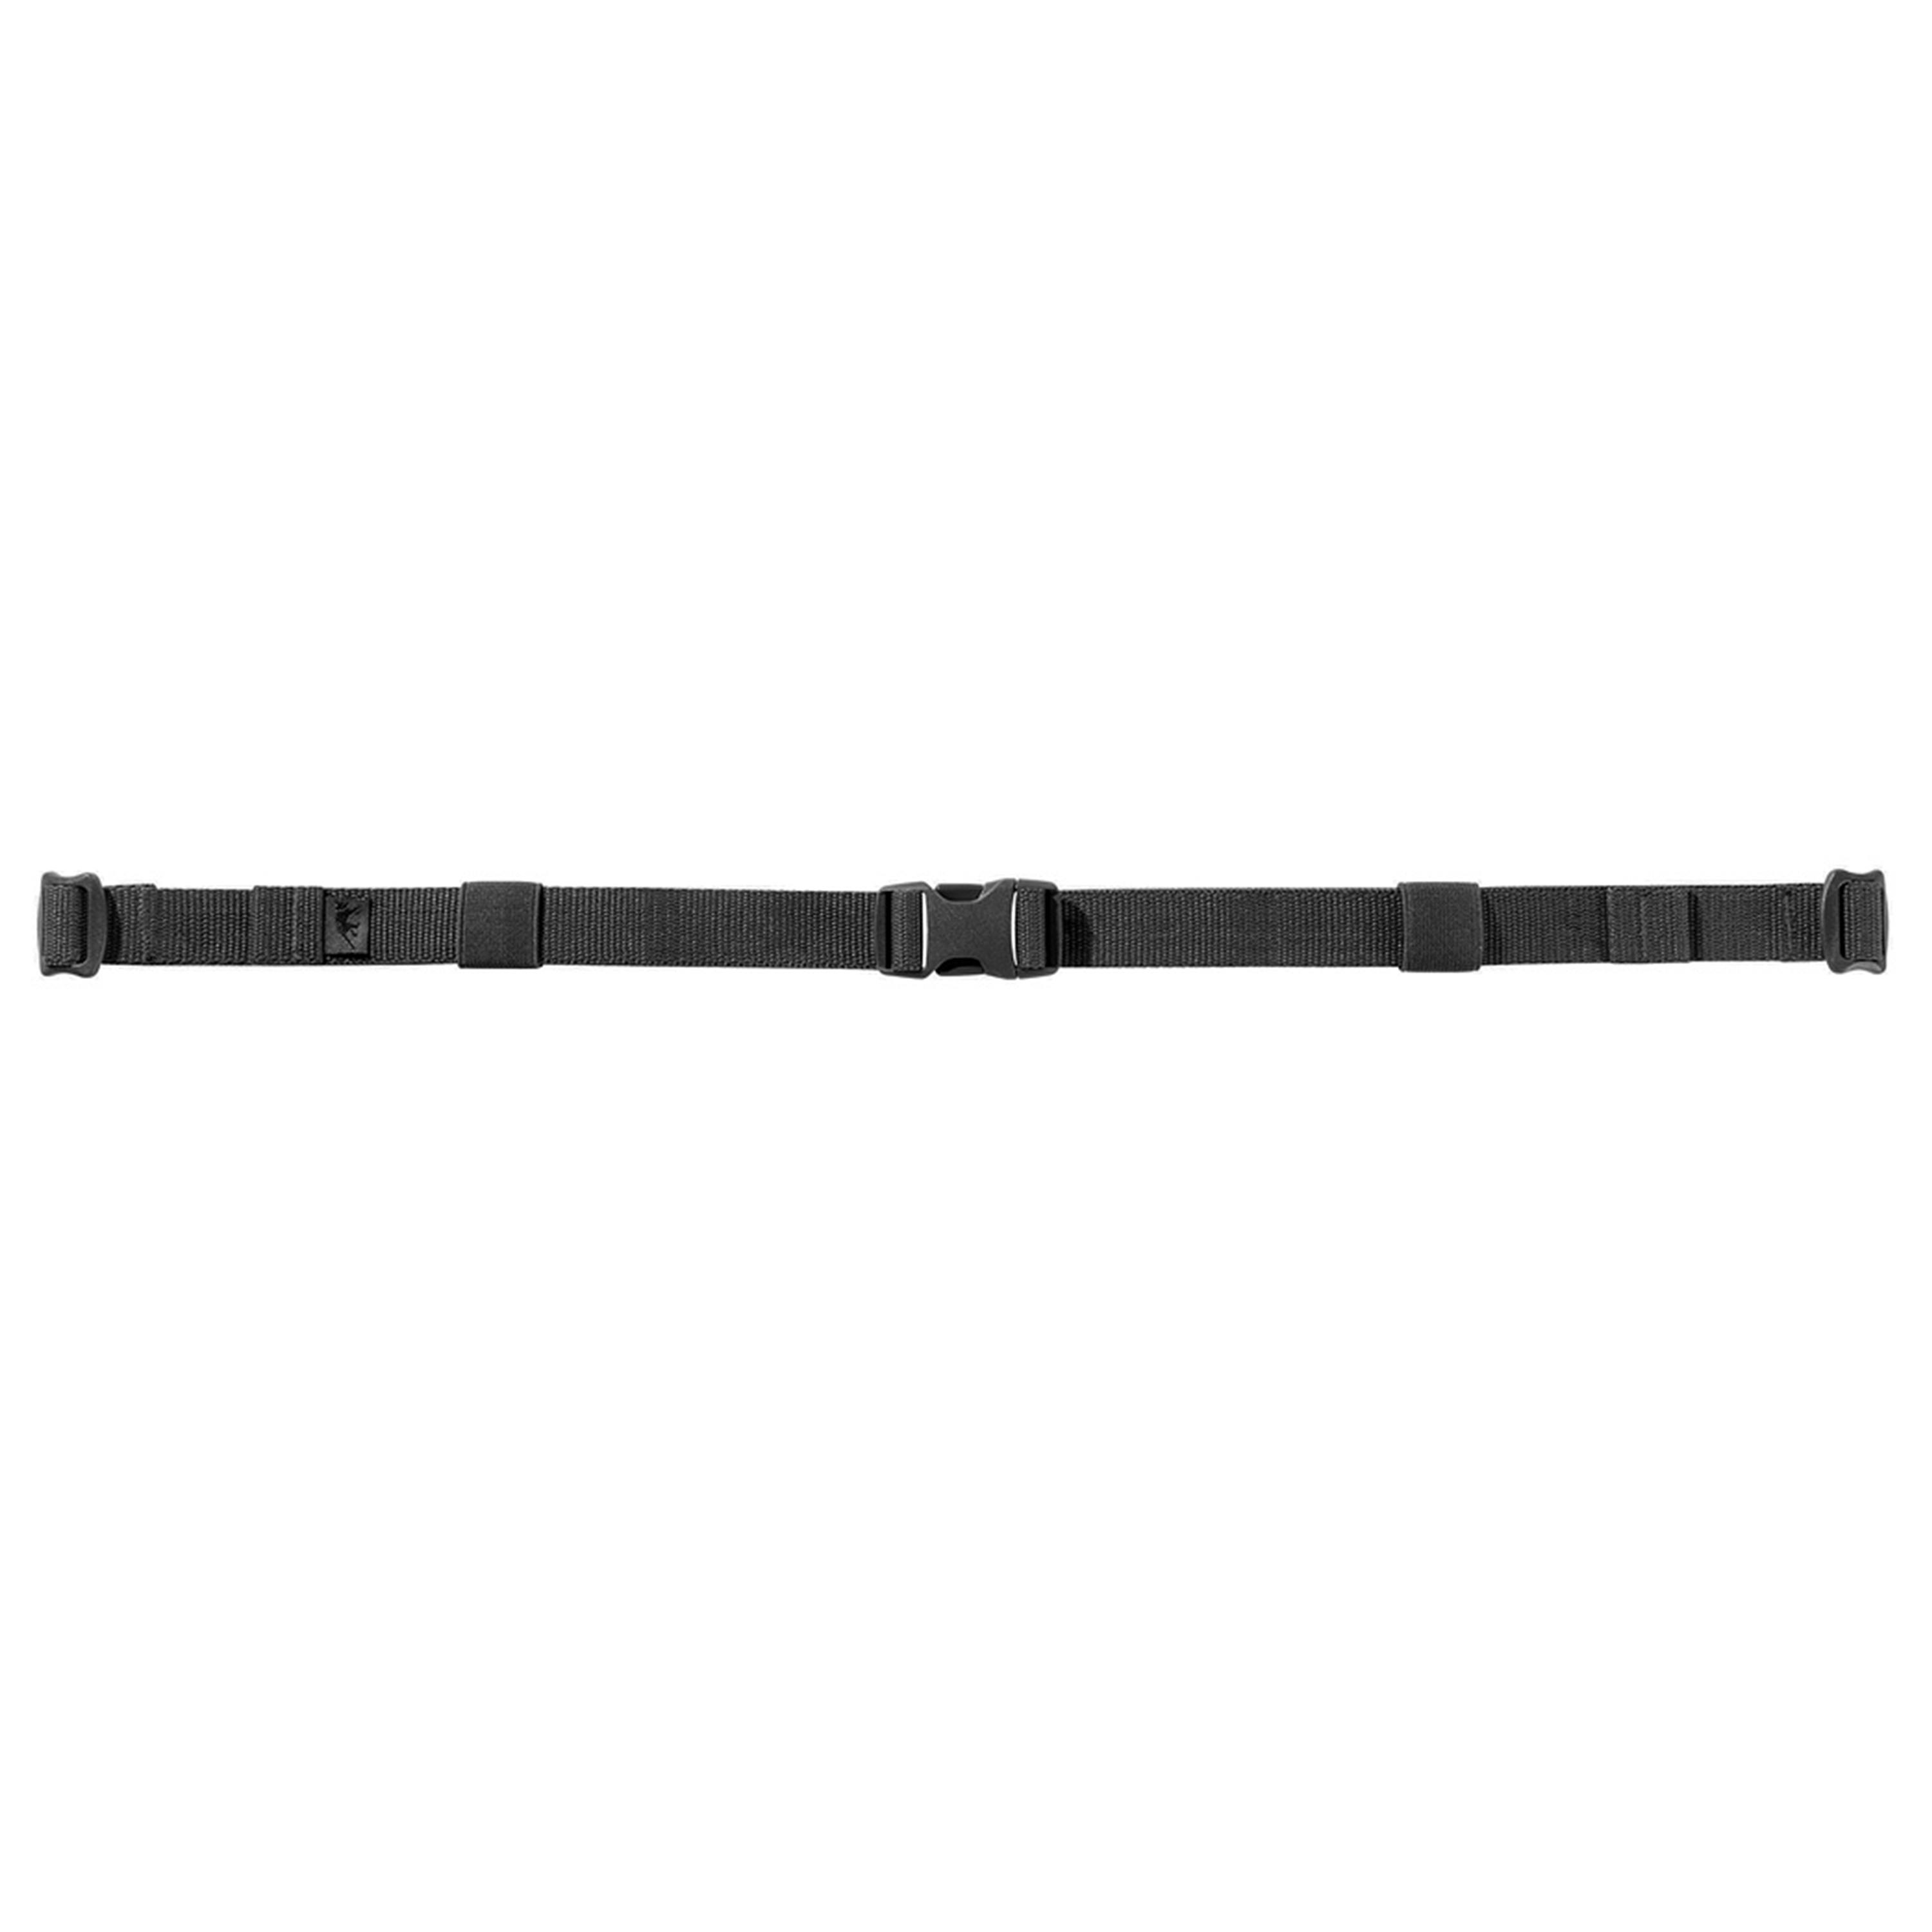 Purchase the Tasmanian Tiger Chest Strap 20 mm black by ASMC